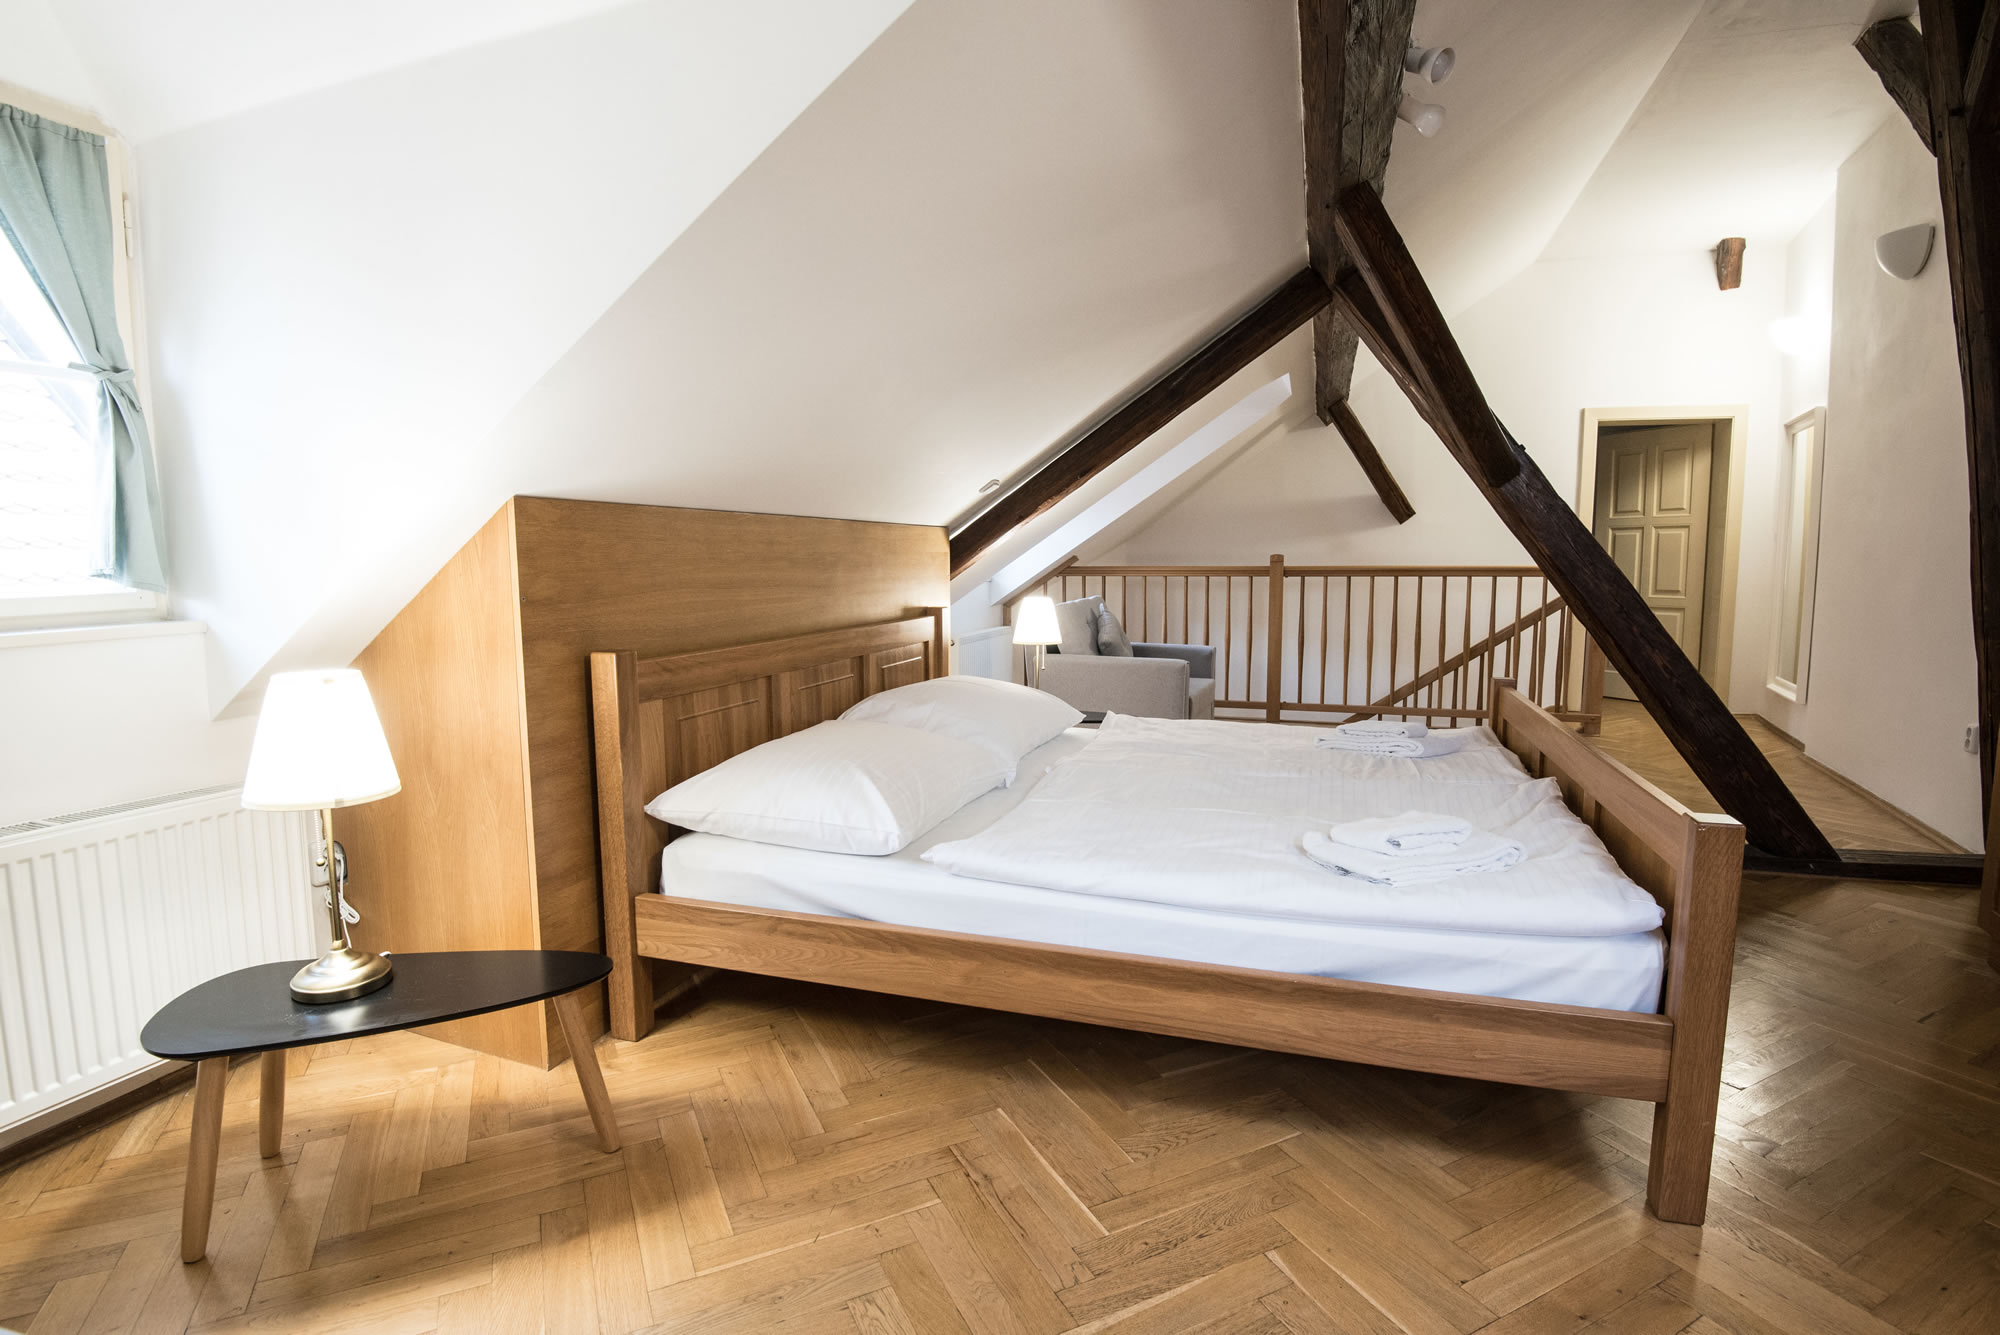 Attic bedroom with wooden parquet, wood beams and a double bed